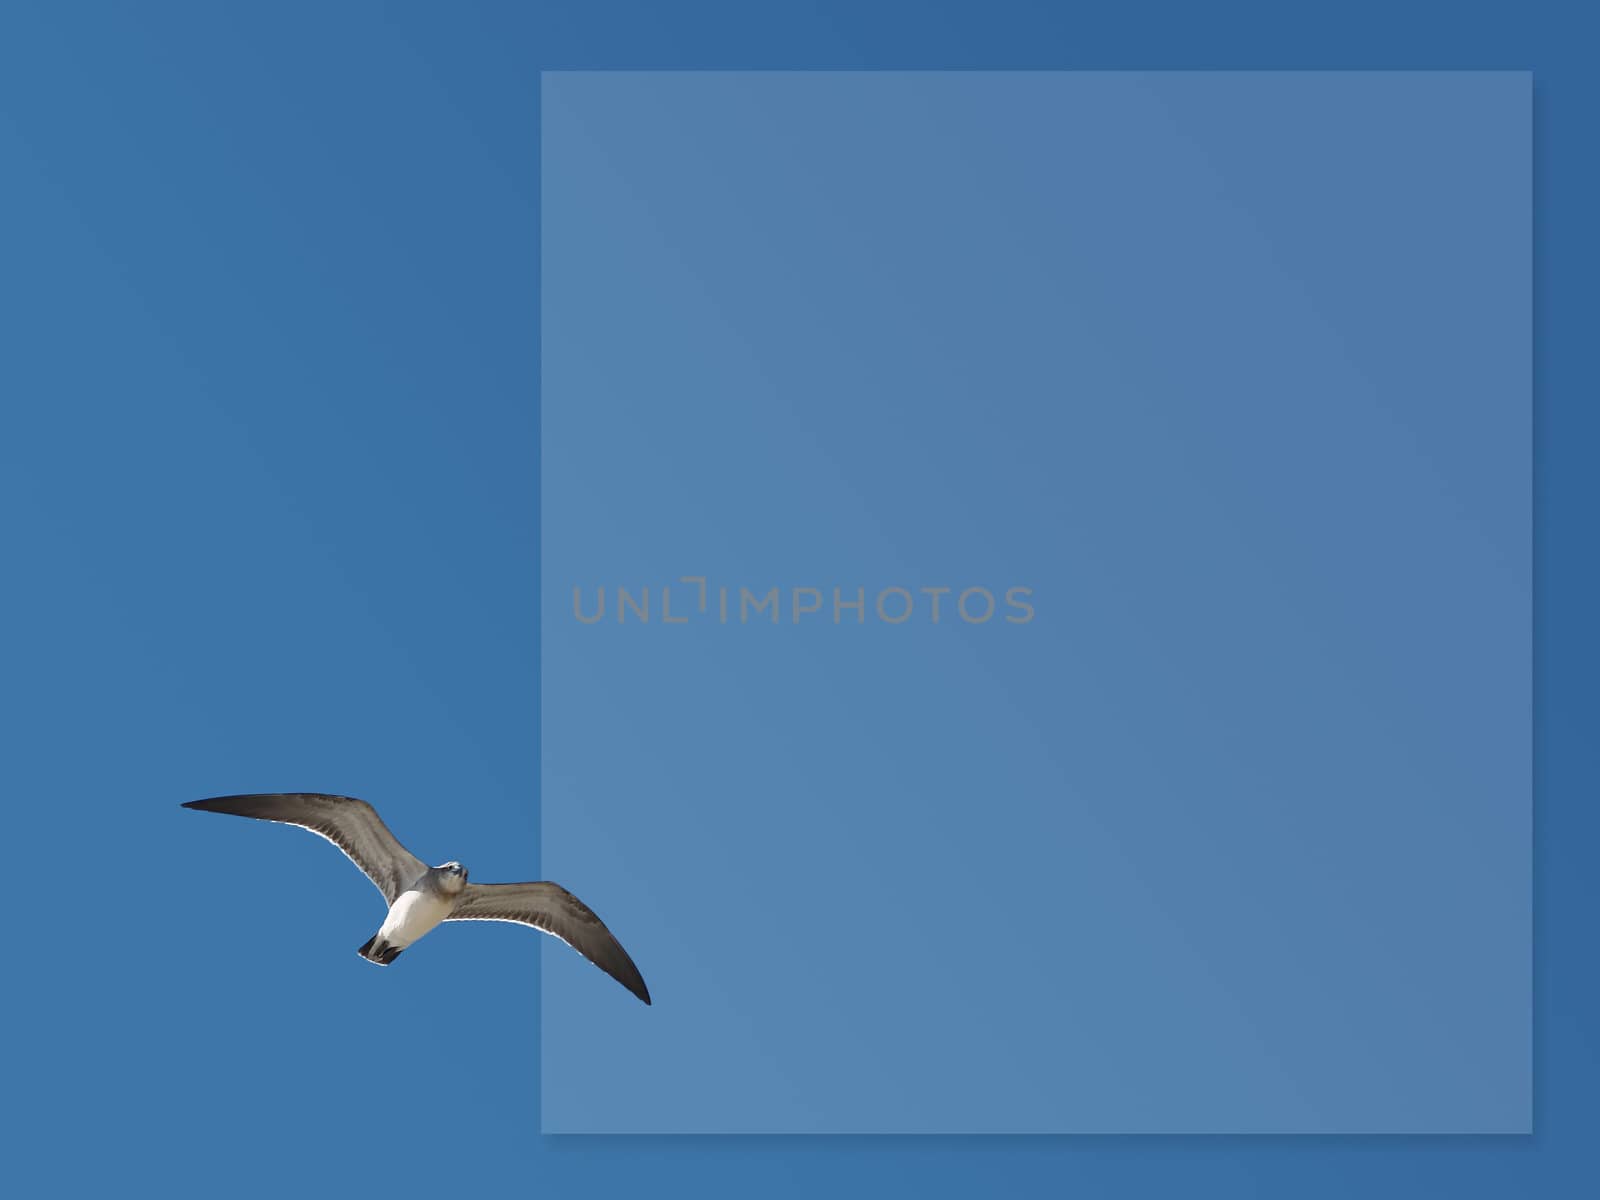 Seagull against clear sky with vertical textbox